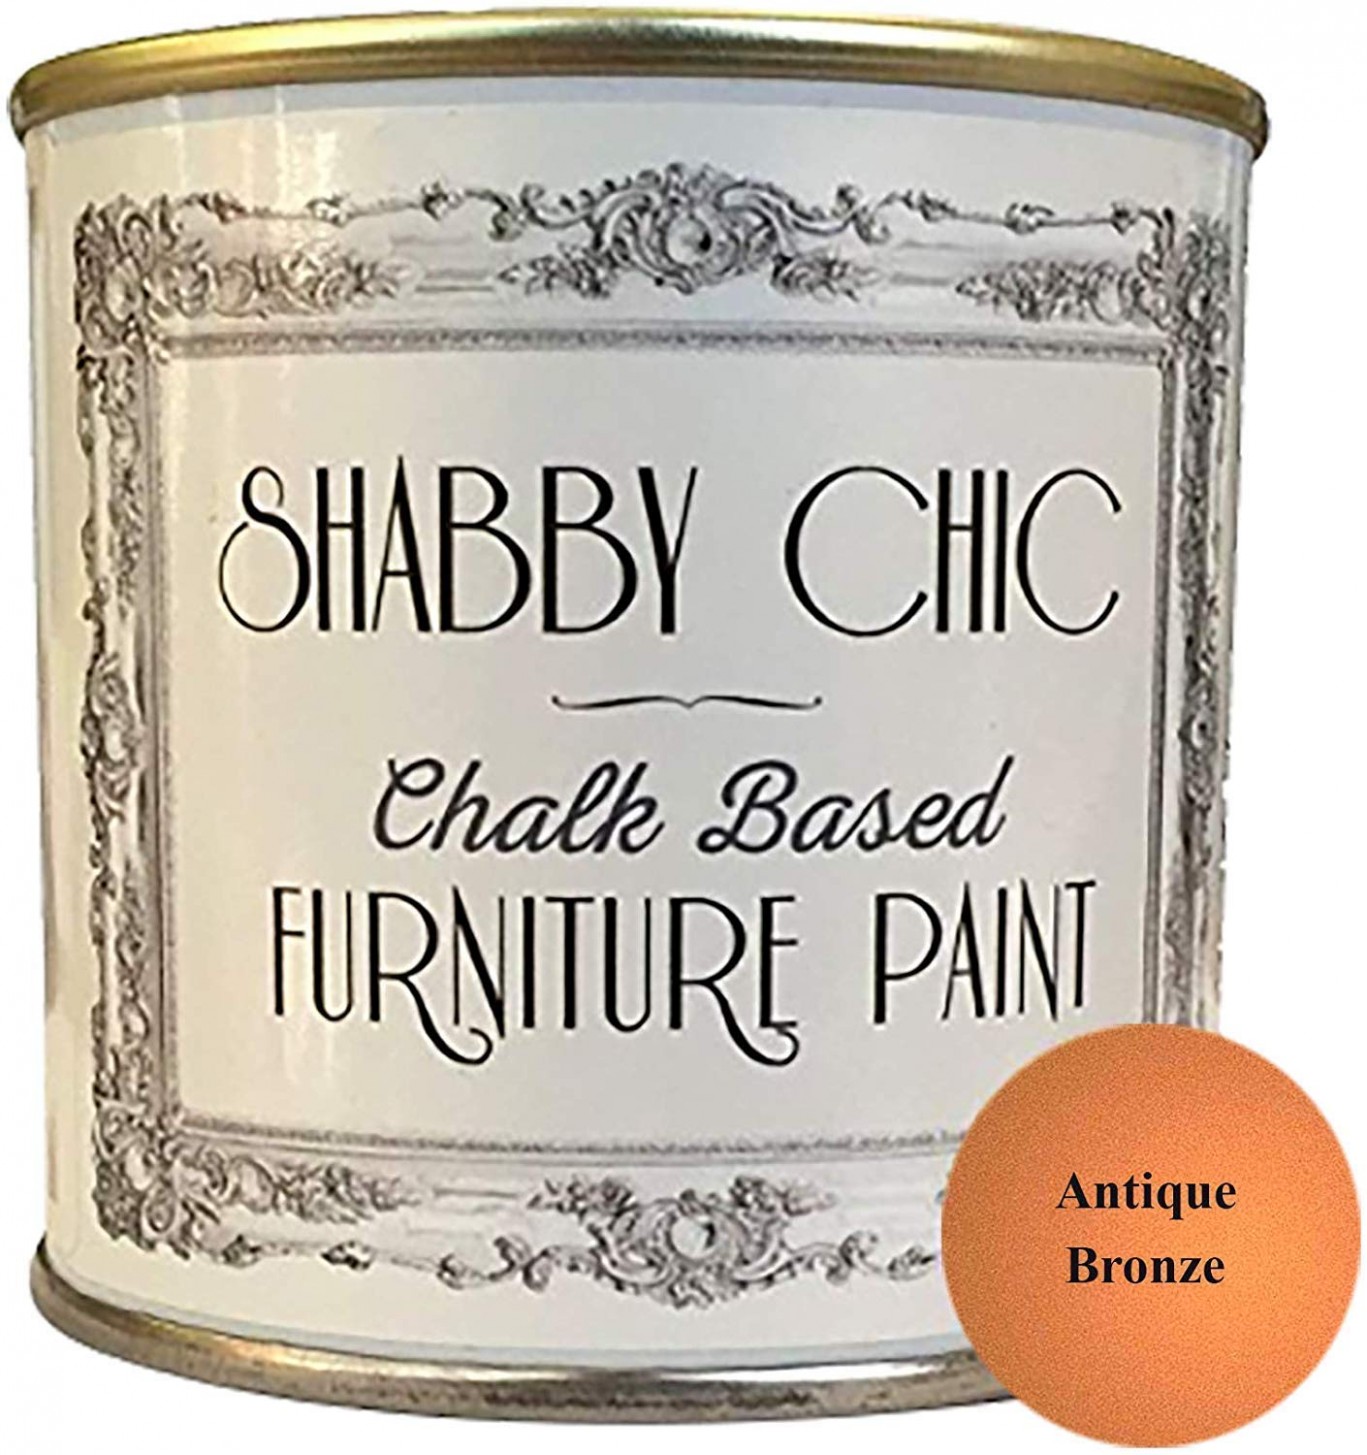 Shabby Chic Chalk Based Furniture Paint Antique Bronze 5ml Chalked, Use On Wood, Stone, Brick, Metal , Plaster Or Plastic, No Primer Needed, ..